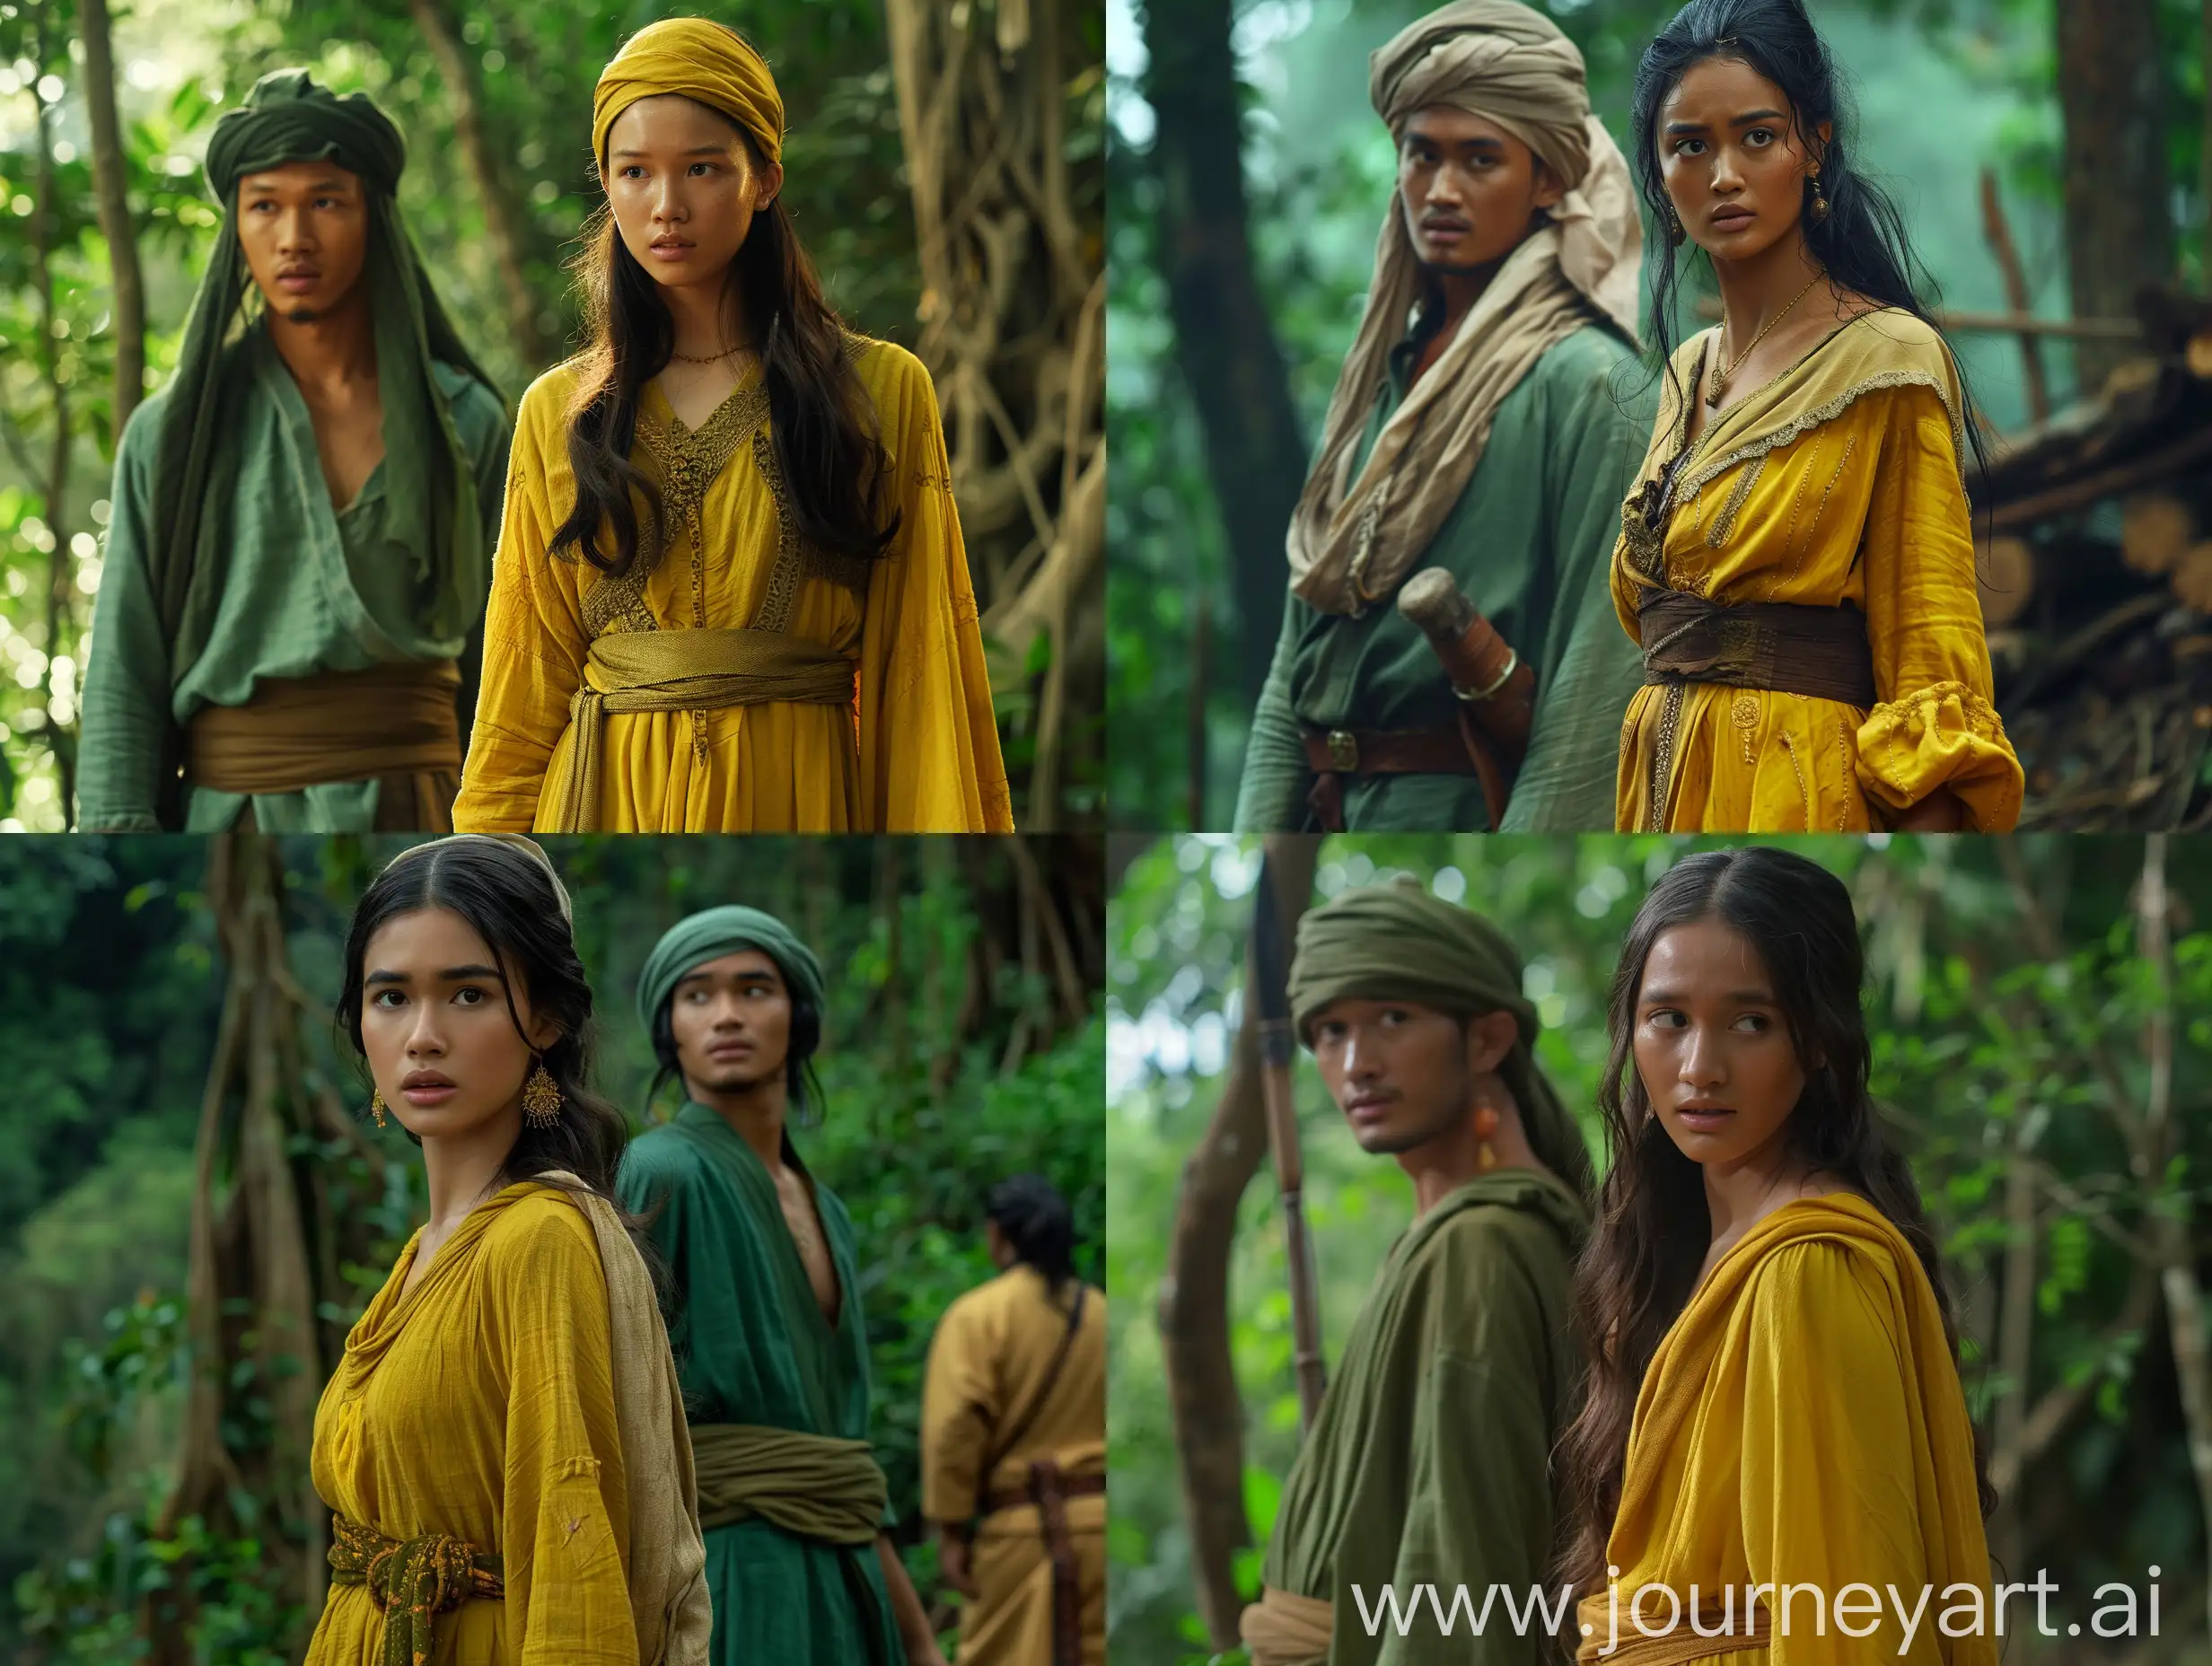 movie scene of the Indonesian kingdom, a young woman dressed in a yellow dress and a cloth slung over her right shoulder, long hair and in a bun seen with a young man dressed in green, wearing a head covering, forest background